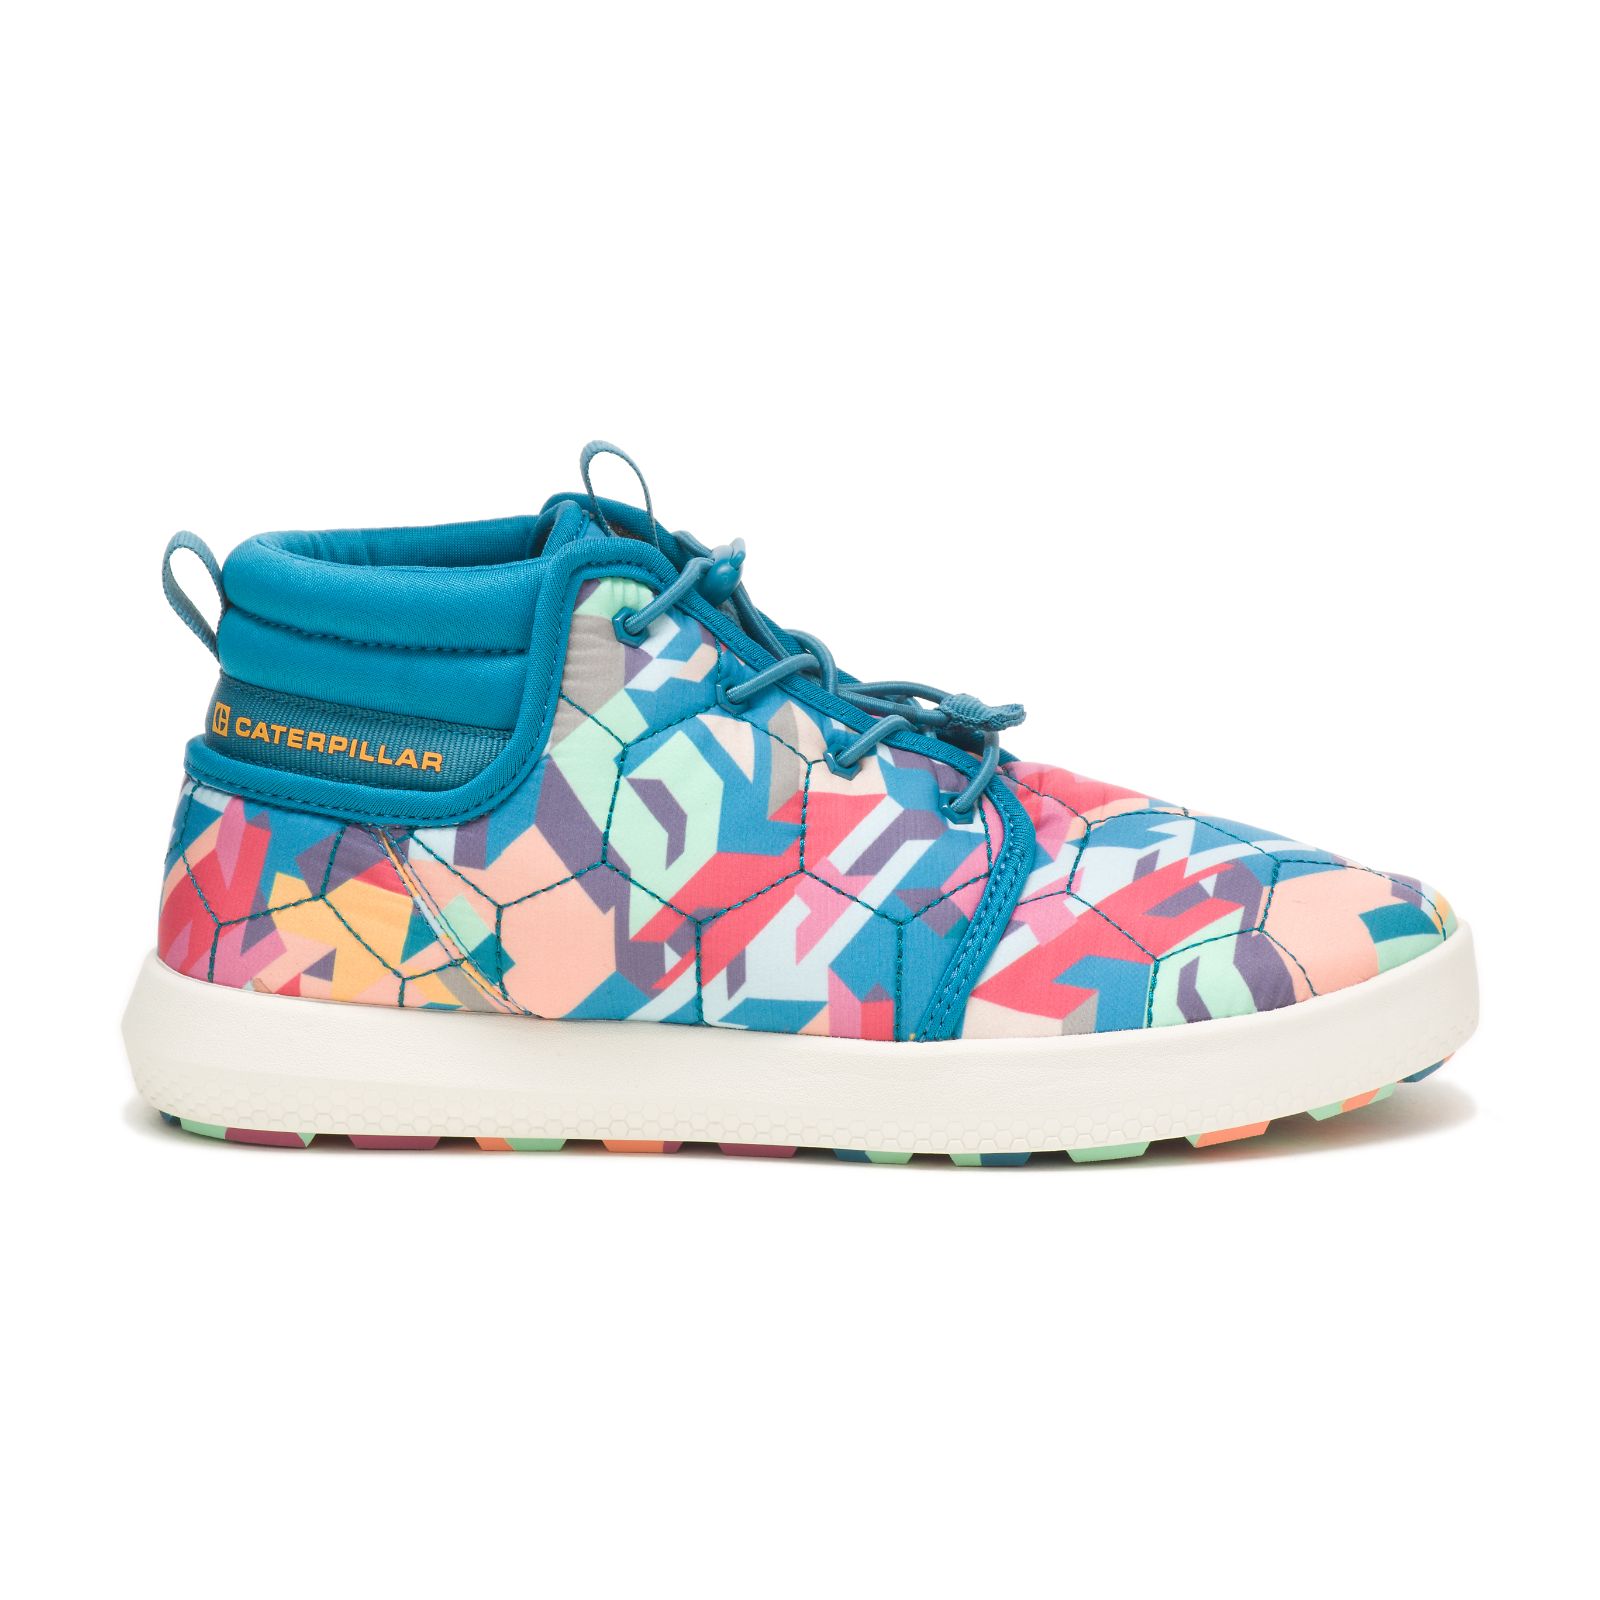 Caterpillar Code Scout Mid Philippines - Womens Trainers - Multicolor Grey 23967BNTZ